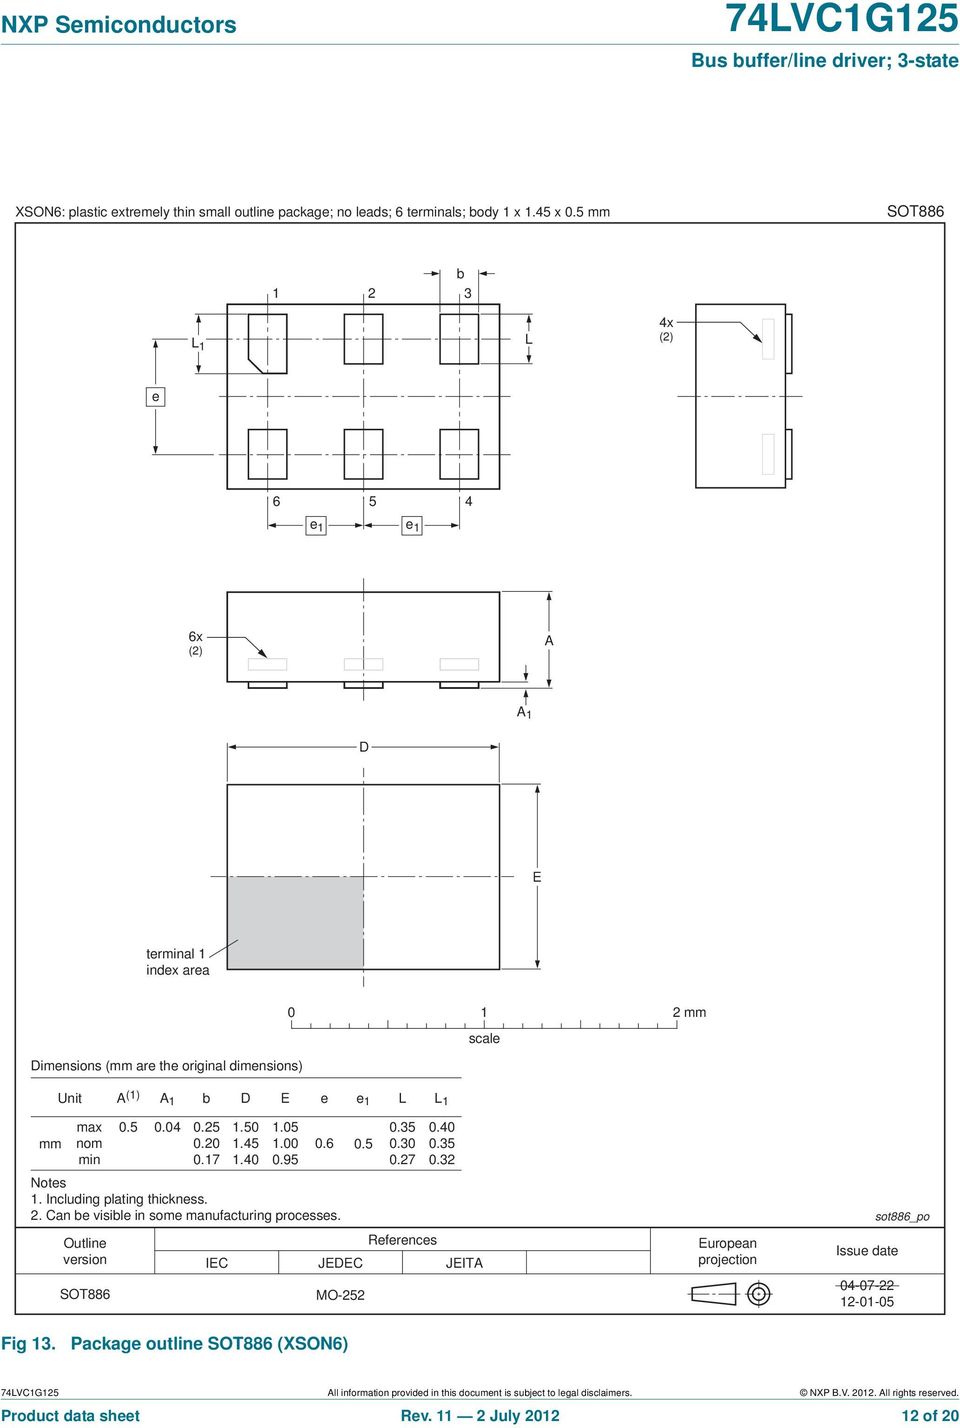 Outline version SOT886 0.5 0.04 0.25 1.50 0.20 1.45 0.17 1.40 1.05 1.00 0.95 0.6 Notes 1. Including plating thickness. 2. Can be visible in some manufacturing processes. 0.5 References IEC JEDEC JEIT MO-252 0.